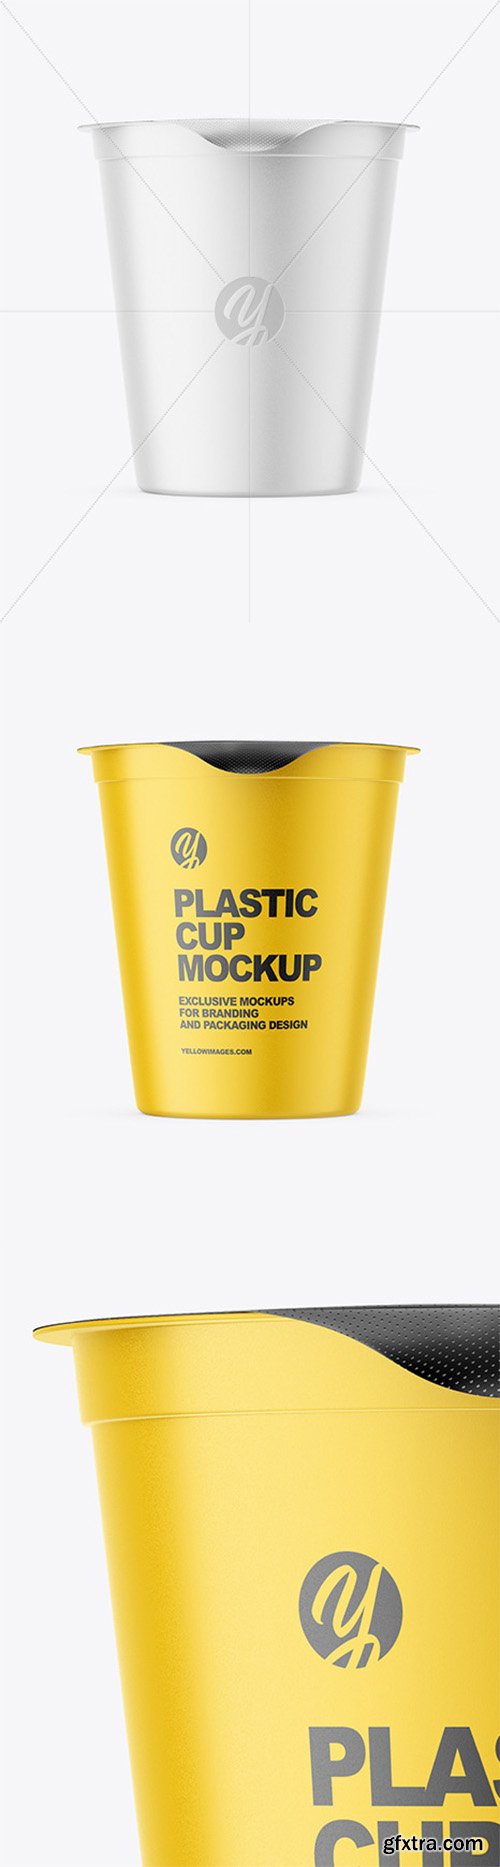 Download Download Matte Plastic Soda Cup Potoshop Yellowimages Mockups